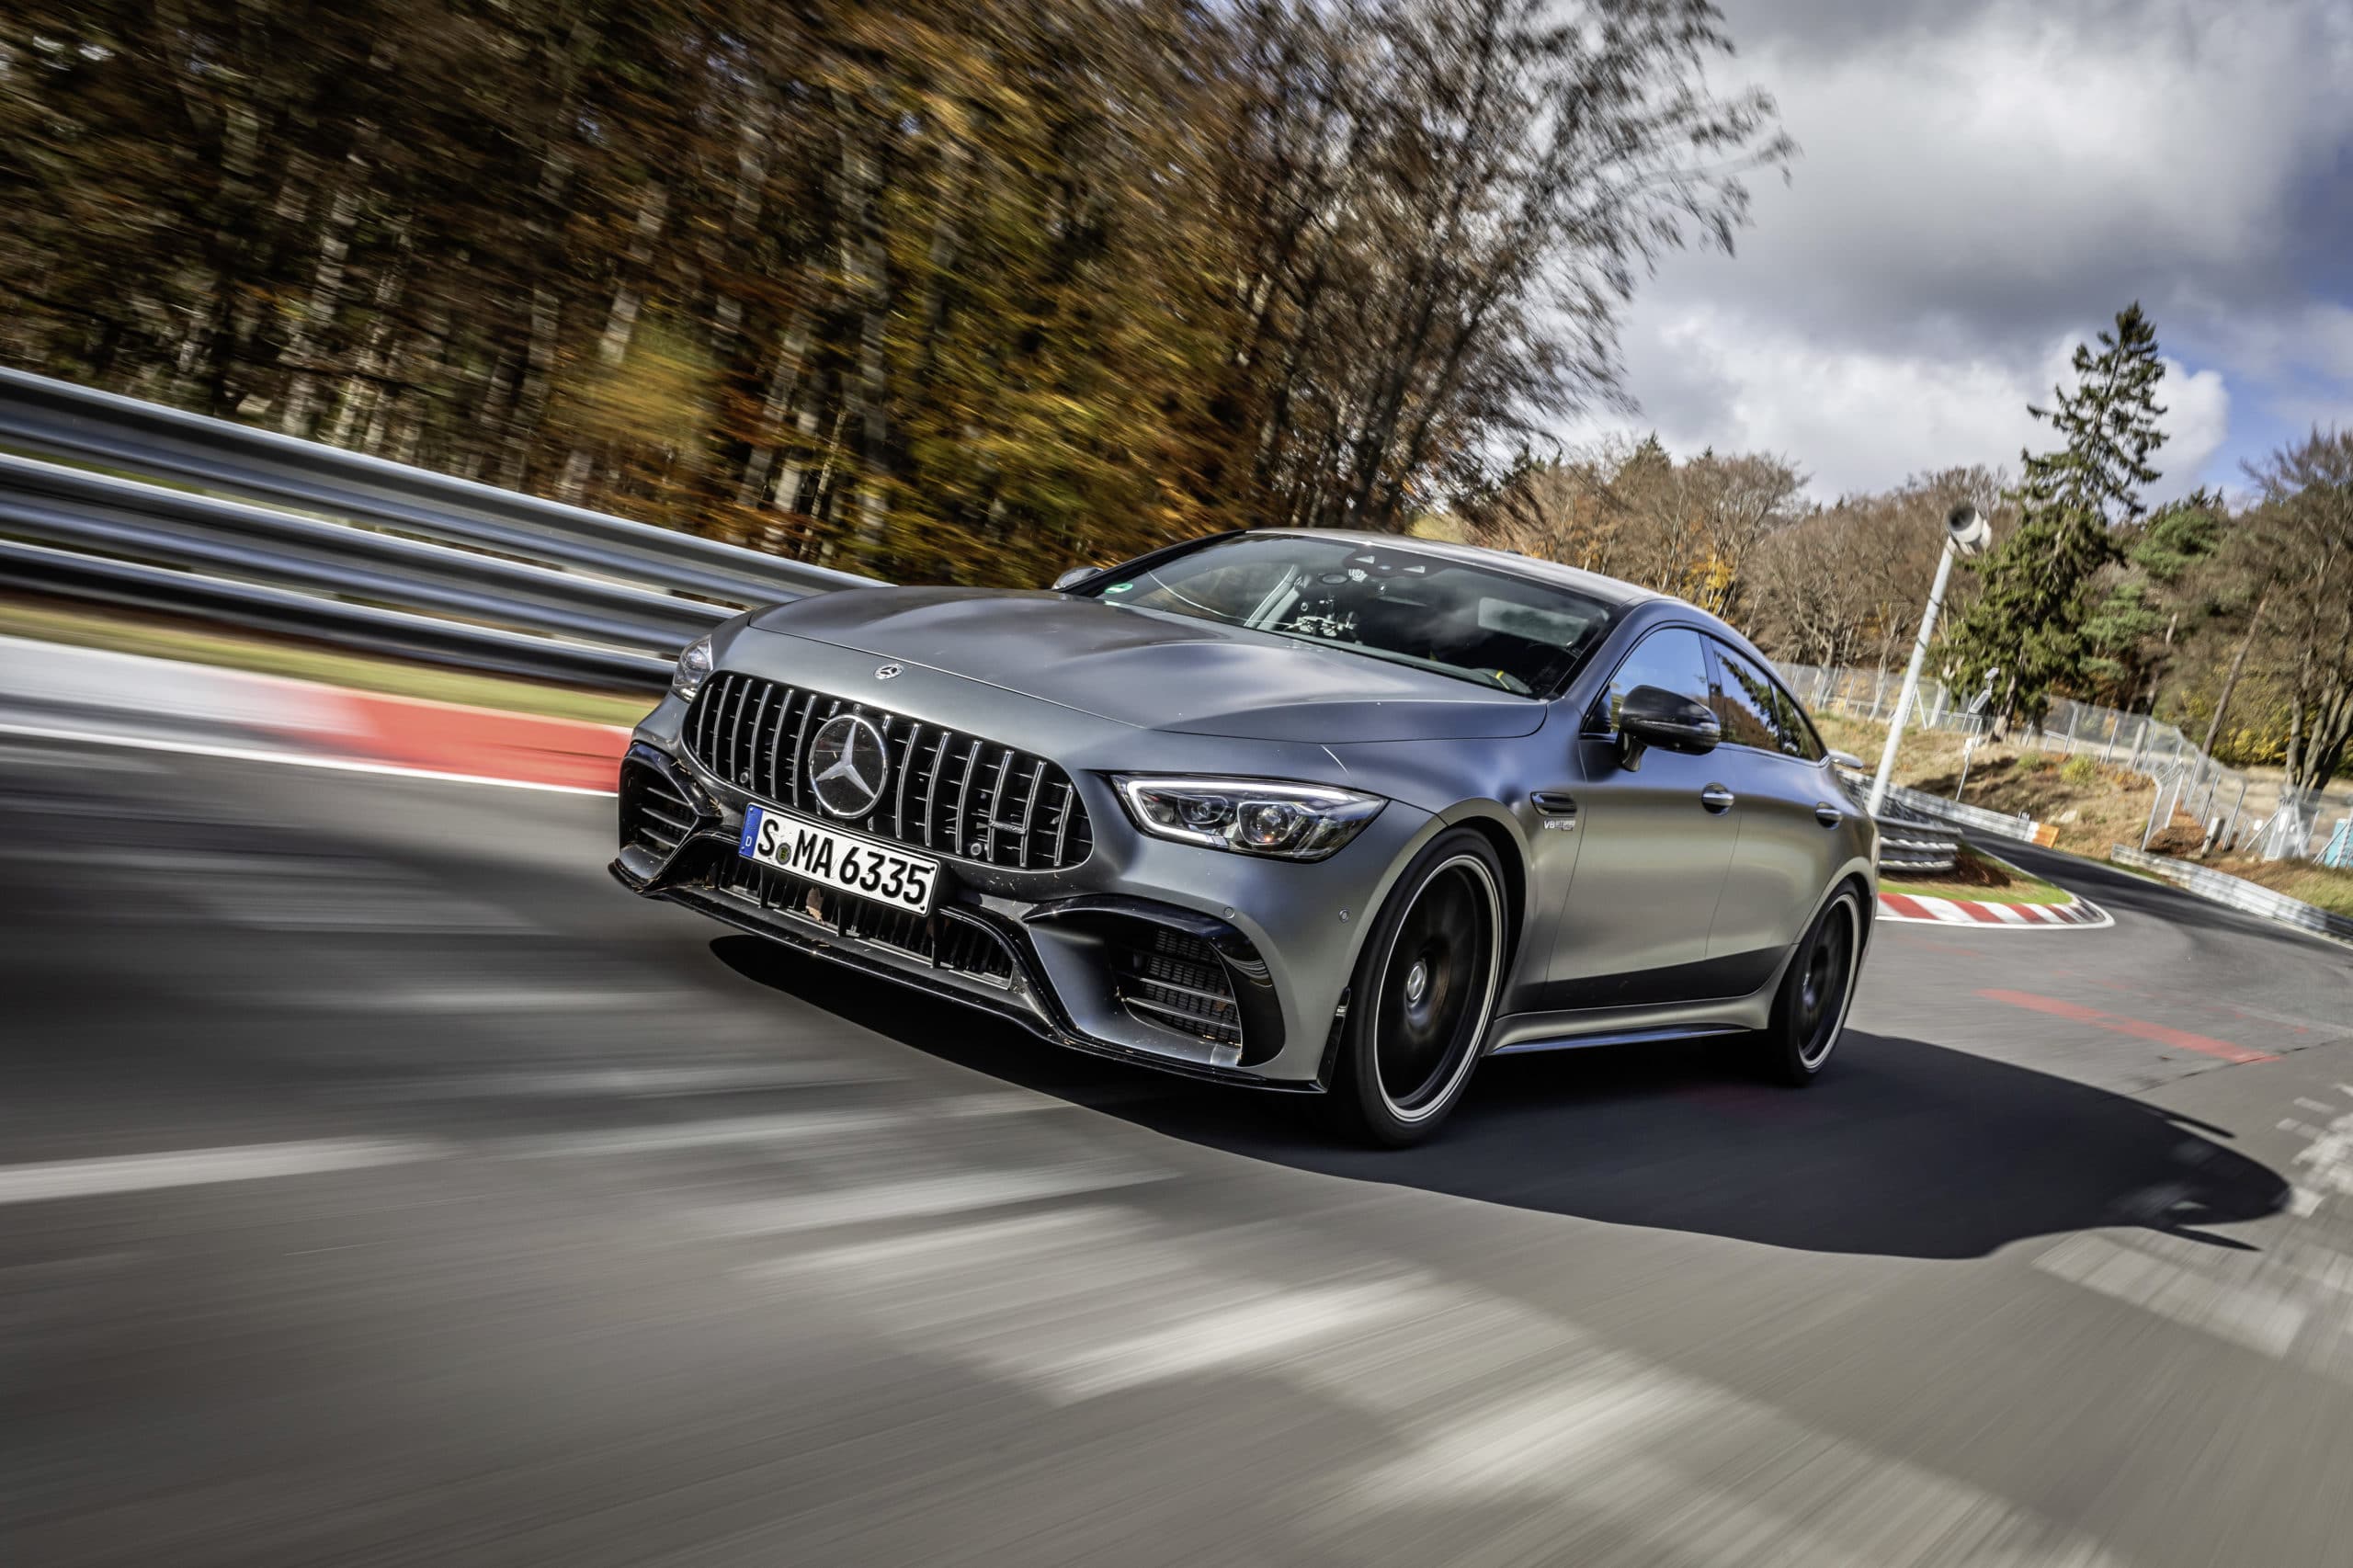 2021 Mercedes-AMG GT 63 S Pulls Down Record Lap On The Nürburgring  Nordschleife